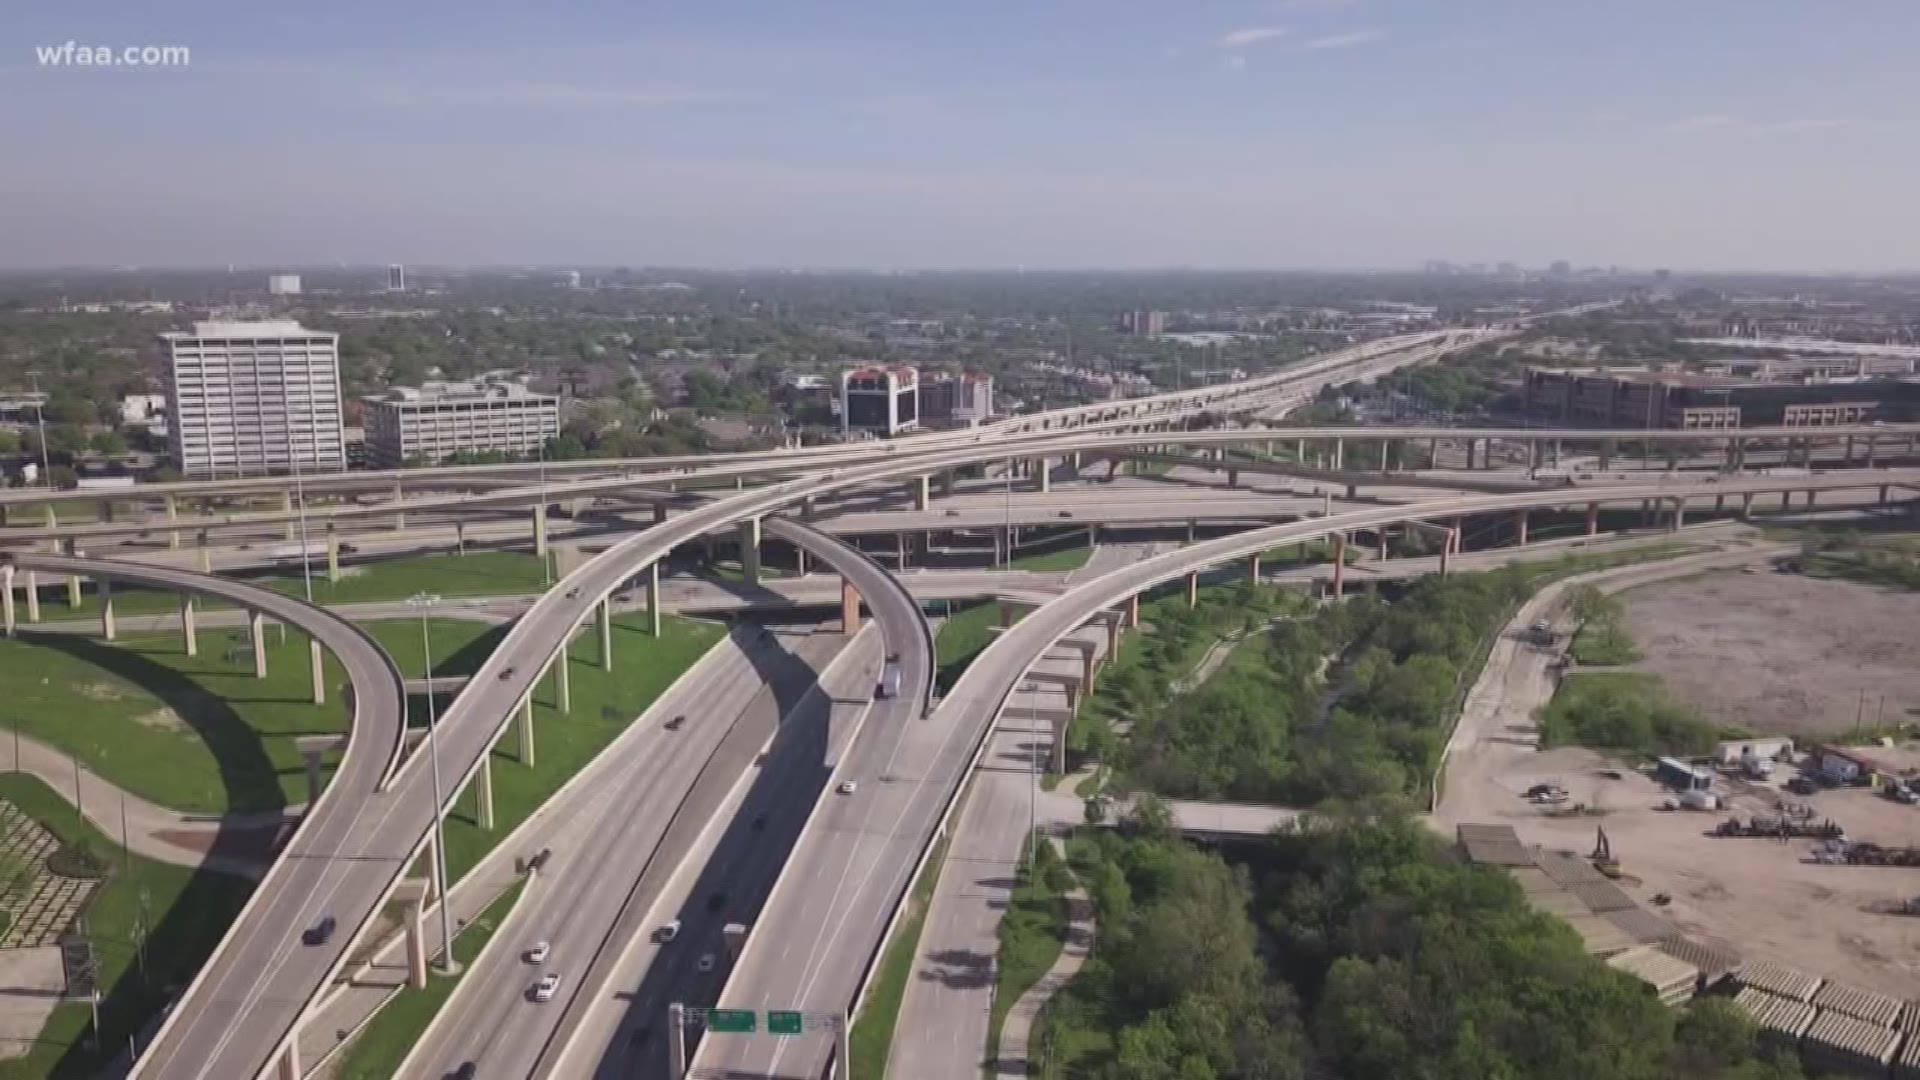 Transactions on Dallas North Tollway fall by 47% as Americans cut their driving time in half